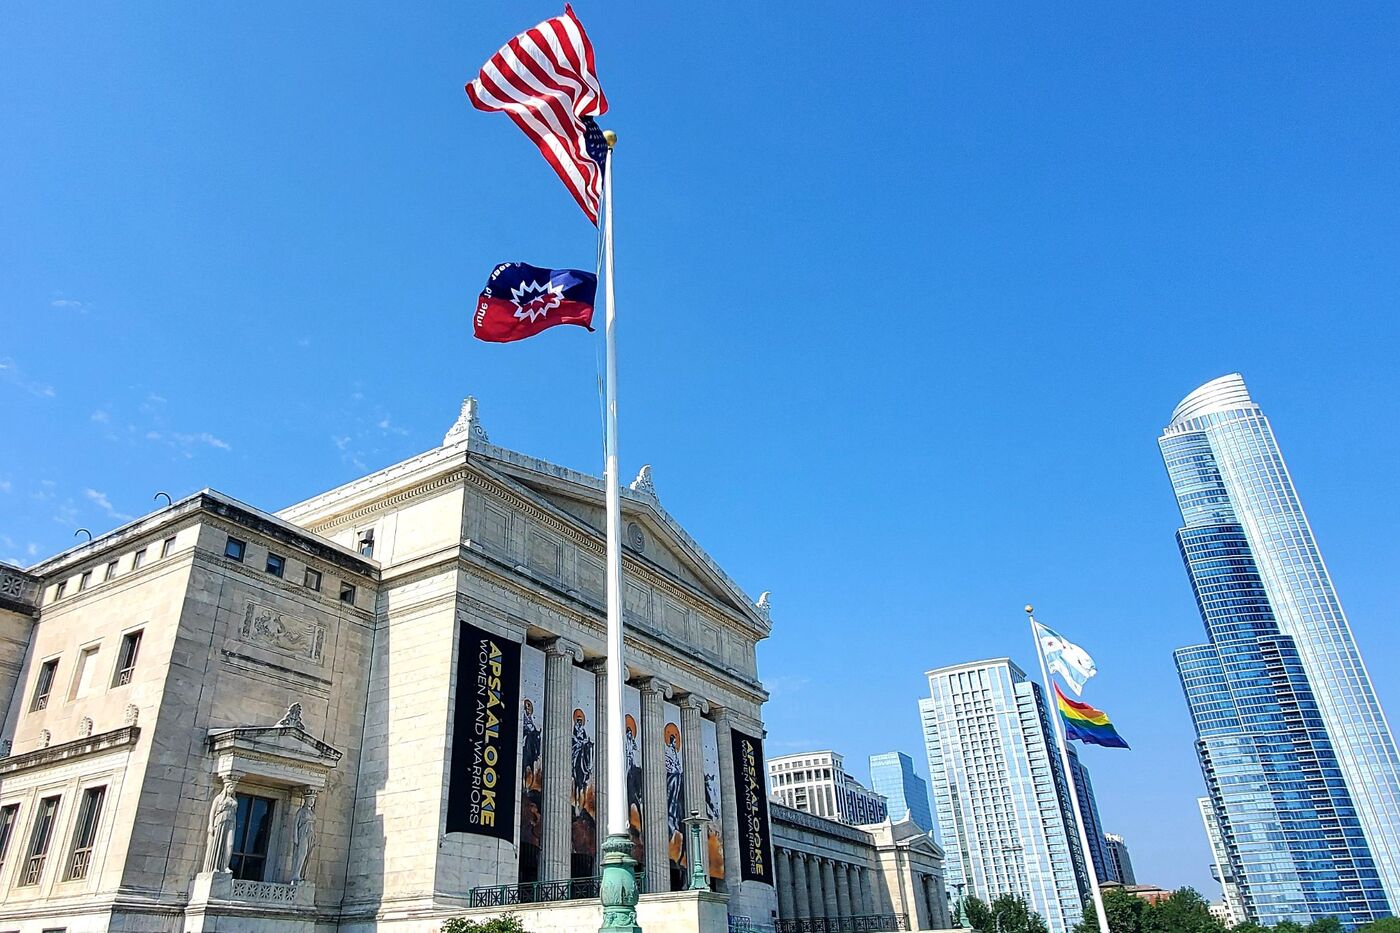 The north facade of the Field Museum, with a clear blue sky and a few high rise buildings in the background. Two flag poles are visible on the museum terraces, one with the United States flag and the Juneteenth flag and the other with the Chicago flag and Pride flag.